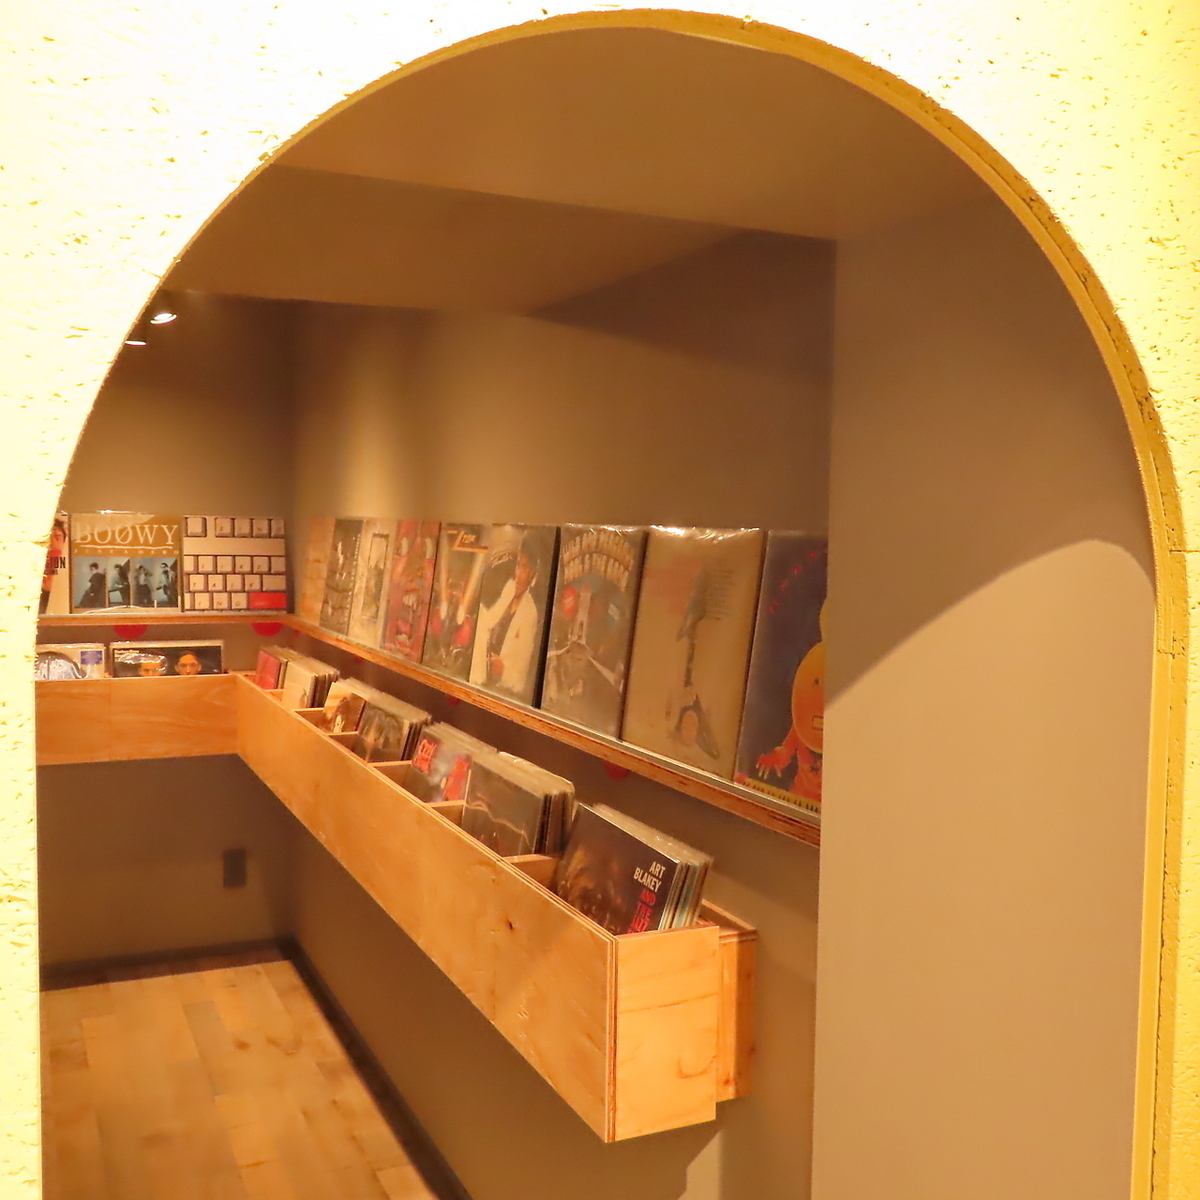 The cafe-style store, which is filled with records, has a stylish and relaxed atmosphere.